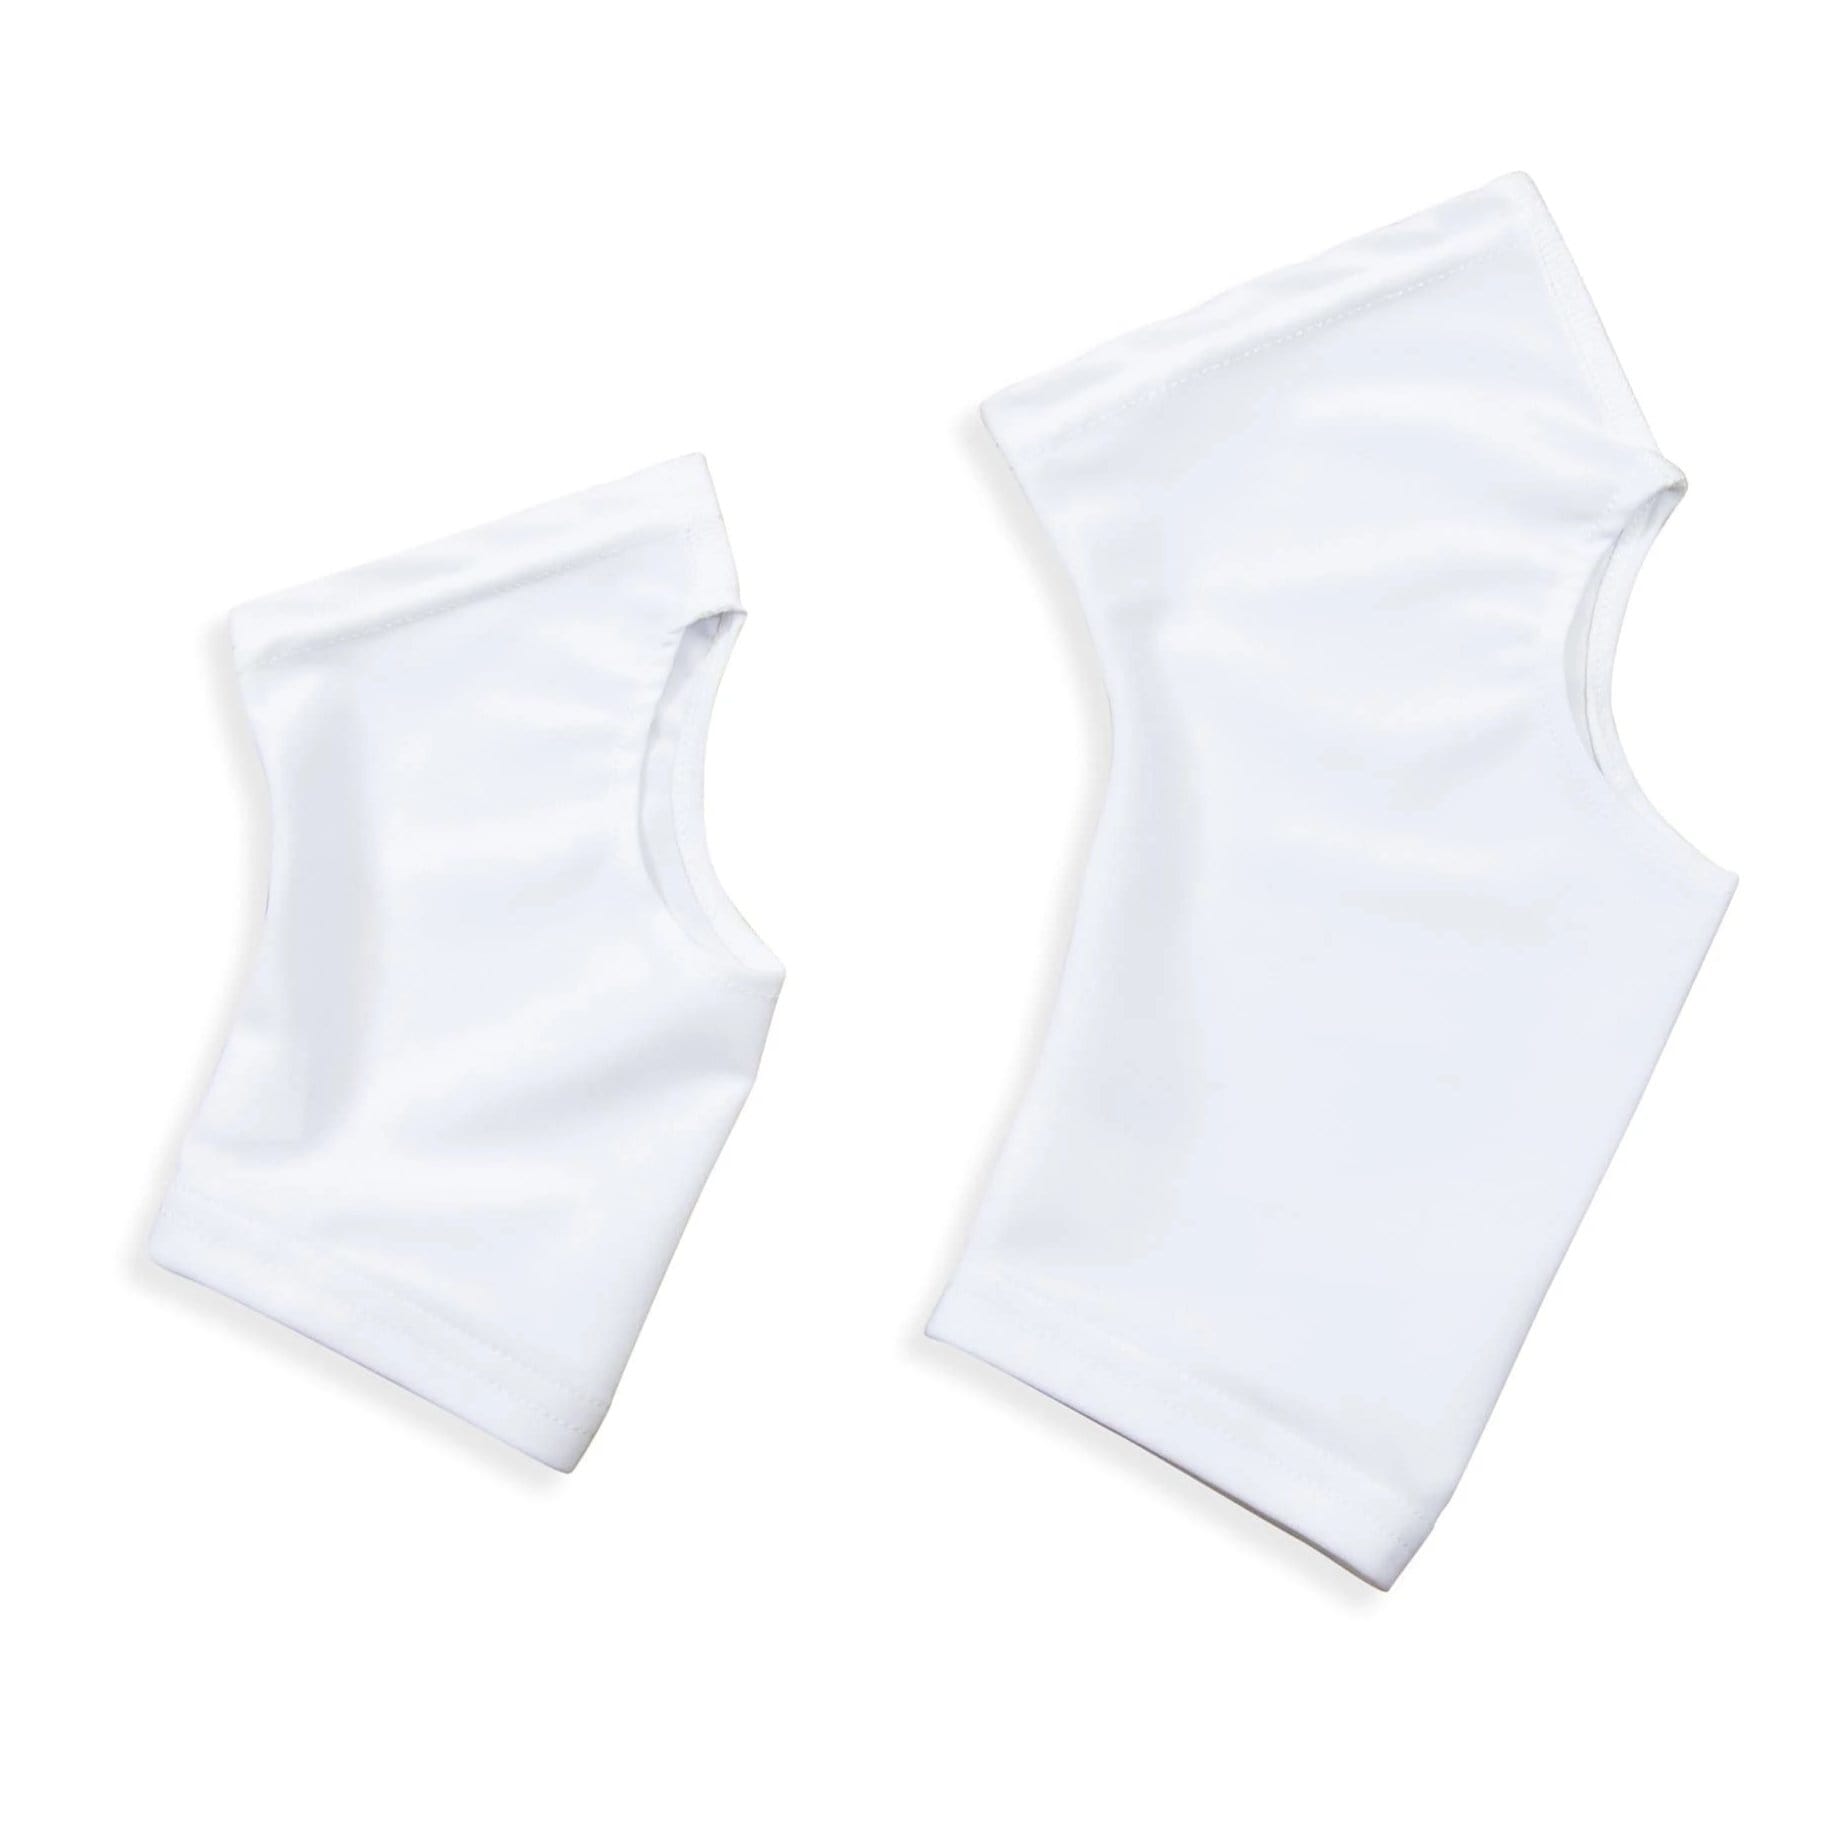 Blank Pair of Spats (Cleat Covers)